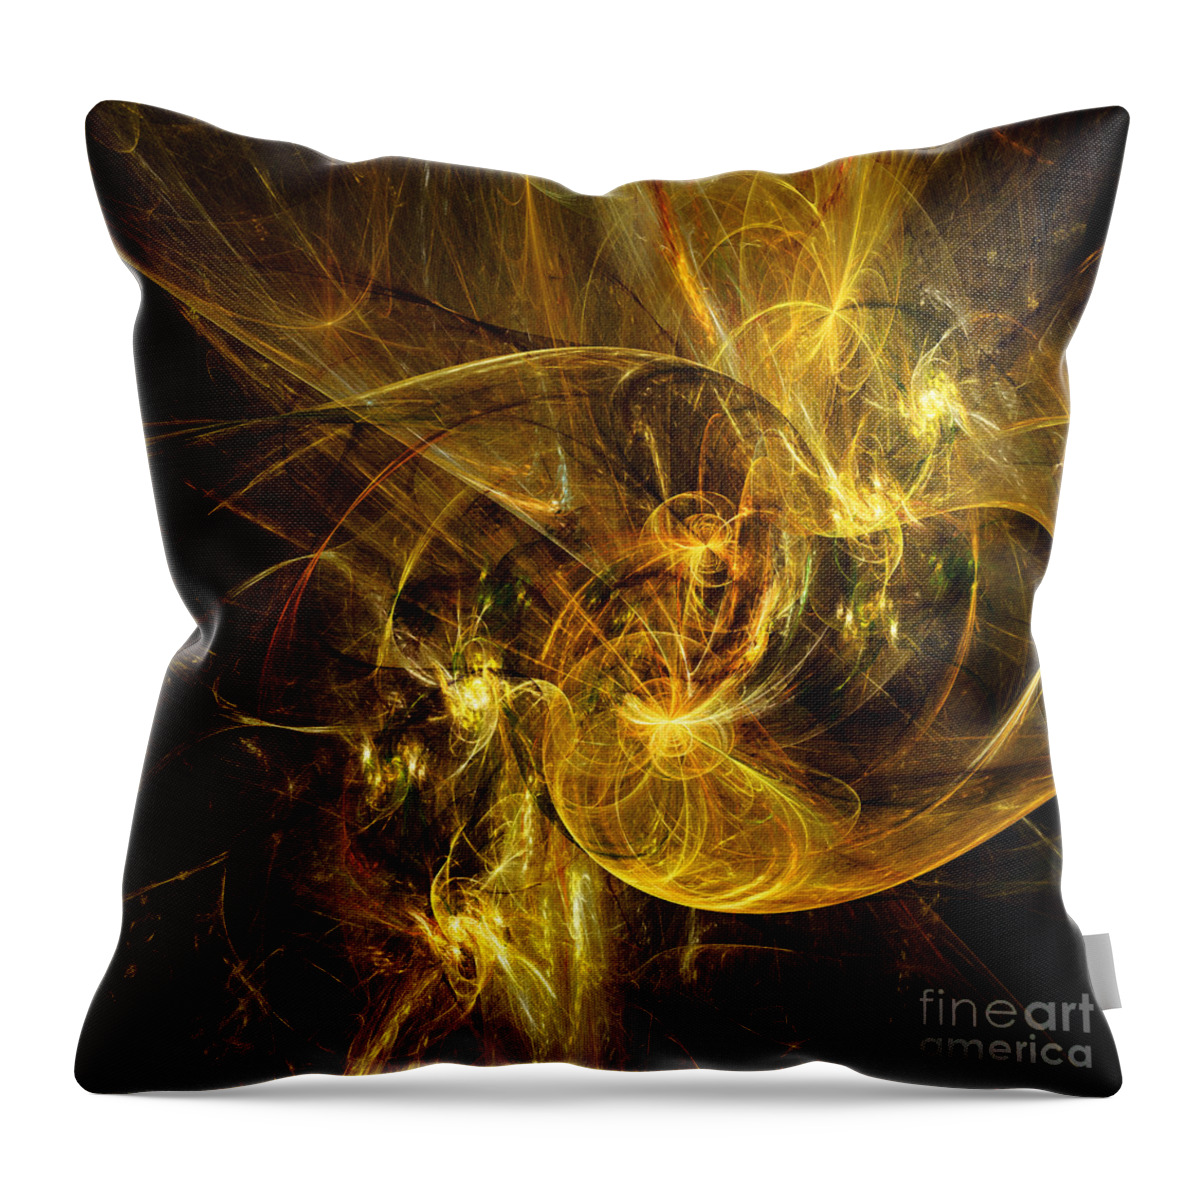 Andee Design Abstract Throw Pillow featuring the digital art Travel In Time To 1969 Entry by Andee Design